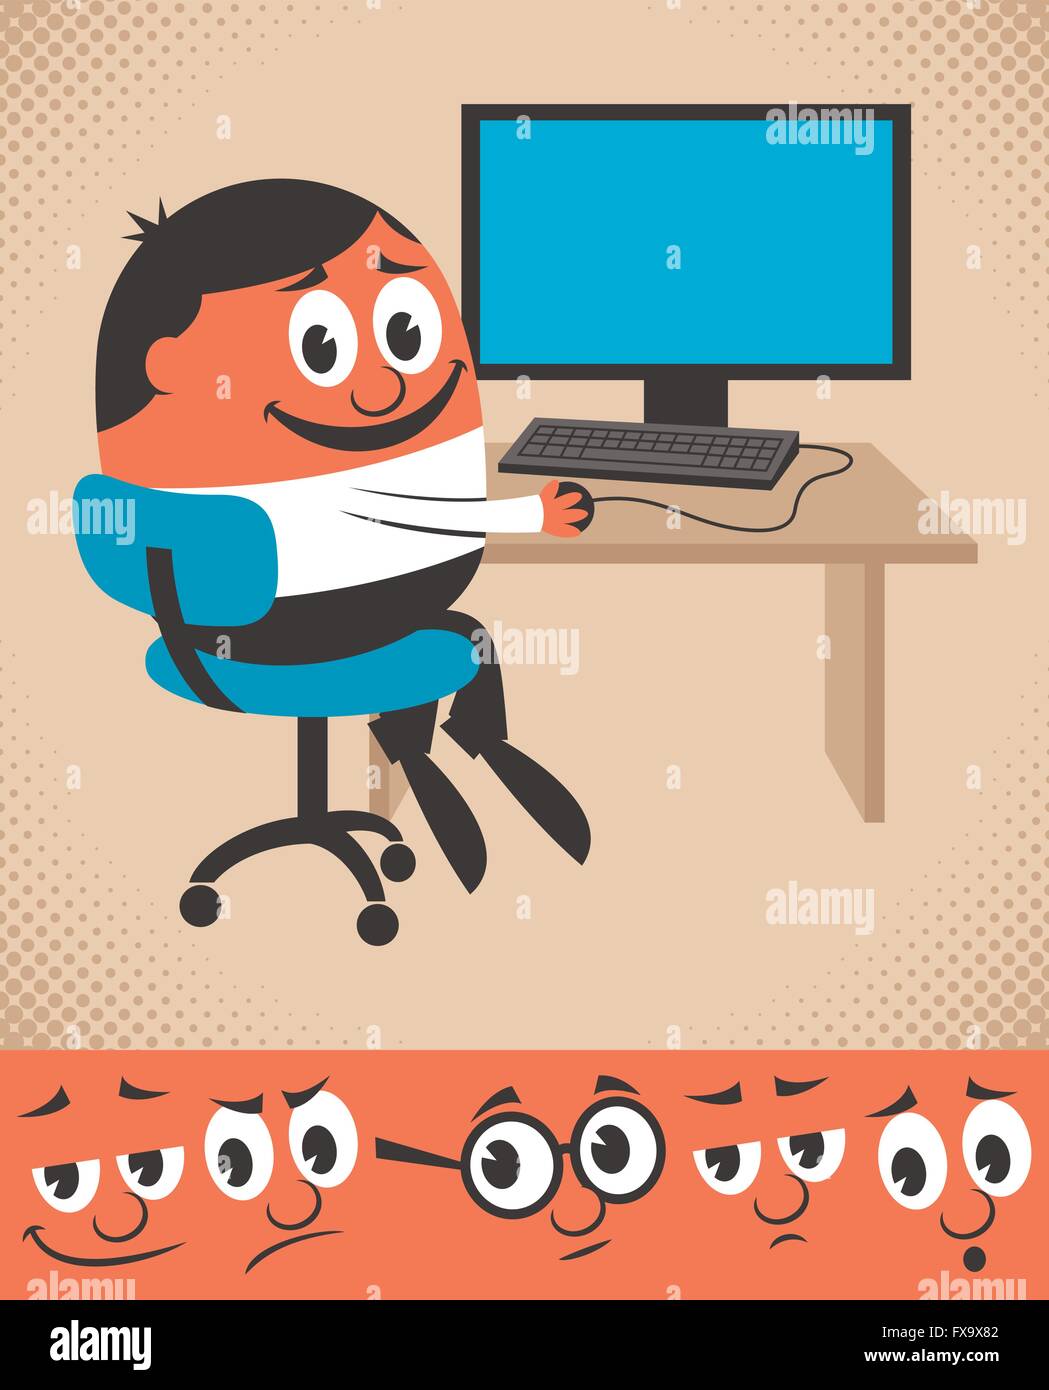 Cartoon character working on desktop computer. You can change his face expression, picking from the 5 additional faces below. Th Stock Vector